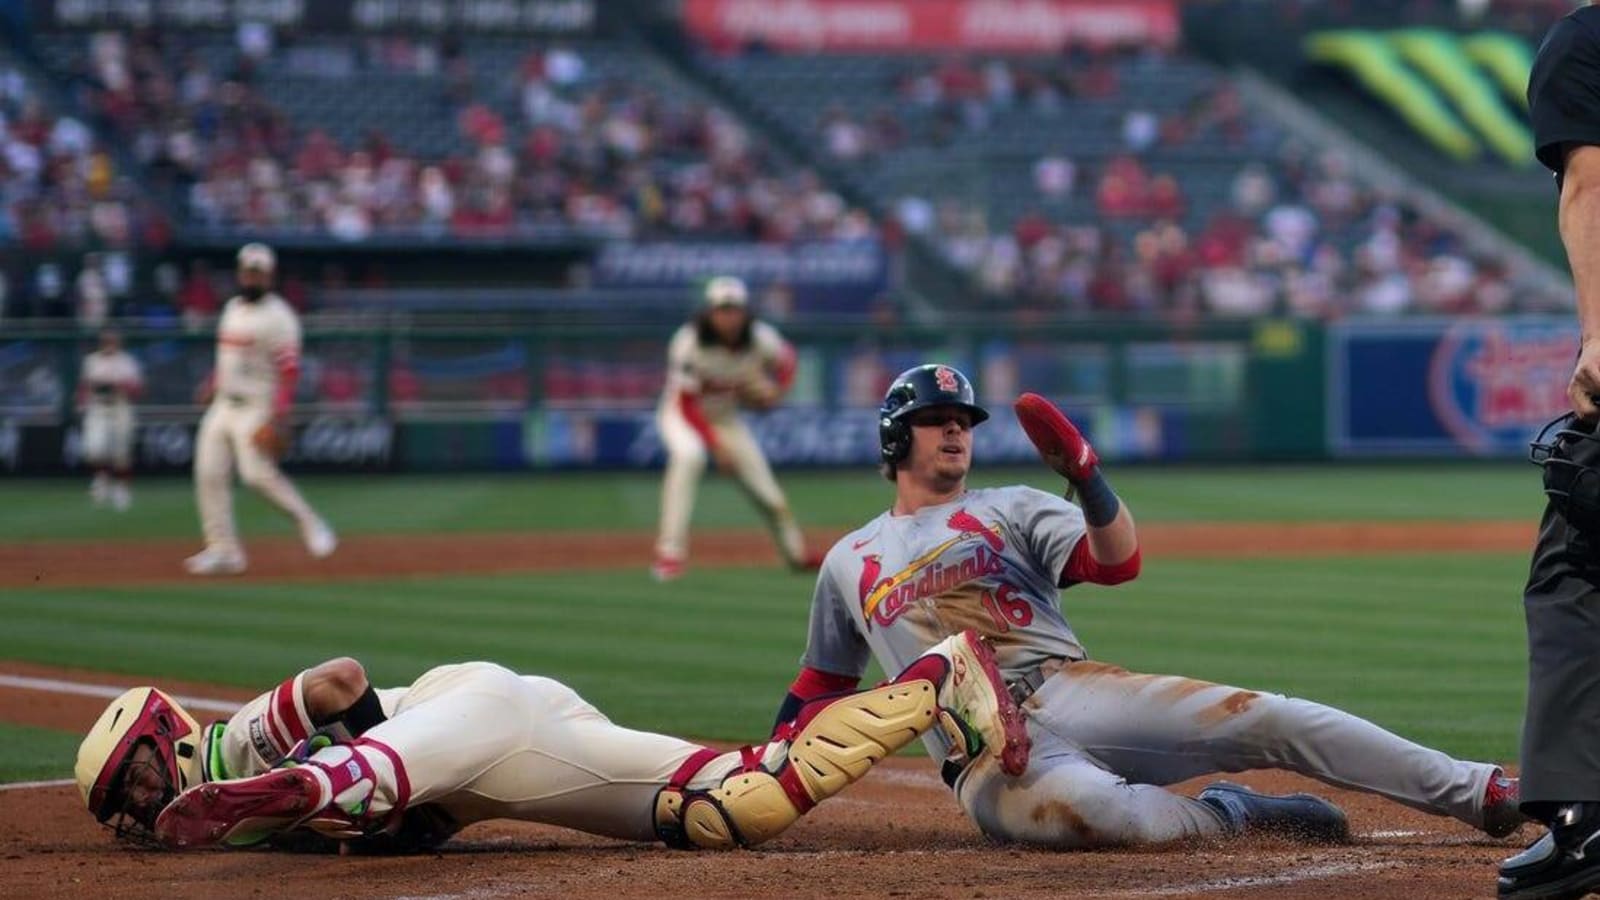 Cardinals edge Angels for third straight victory